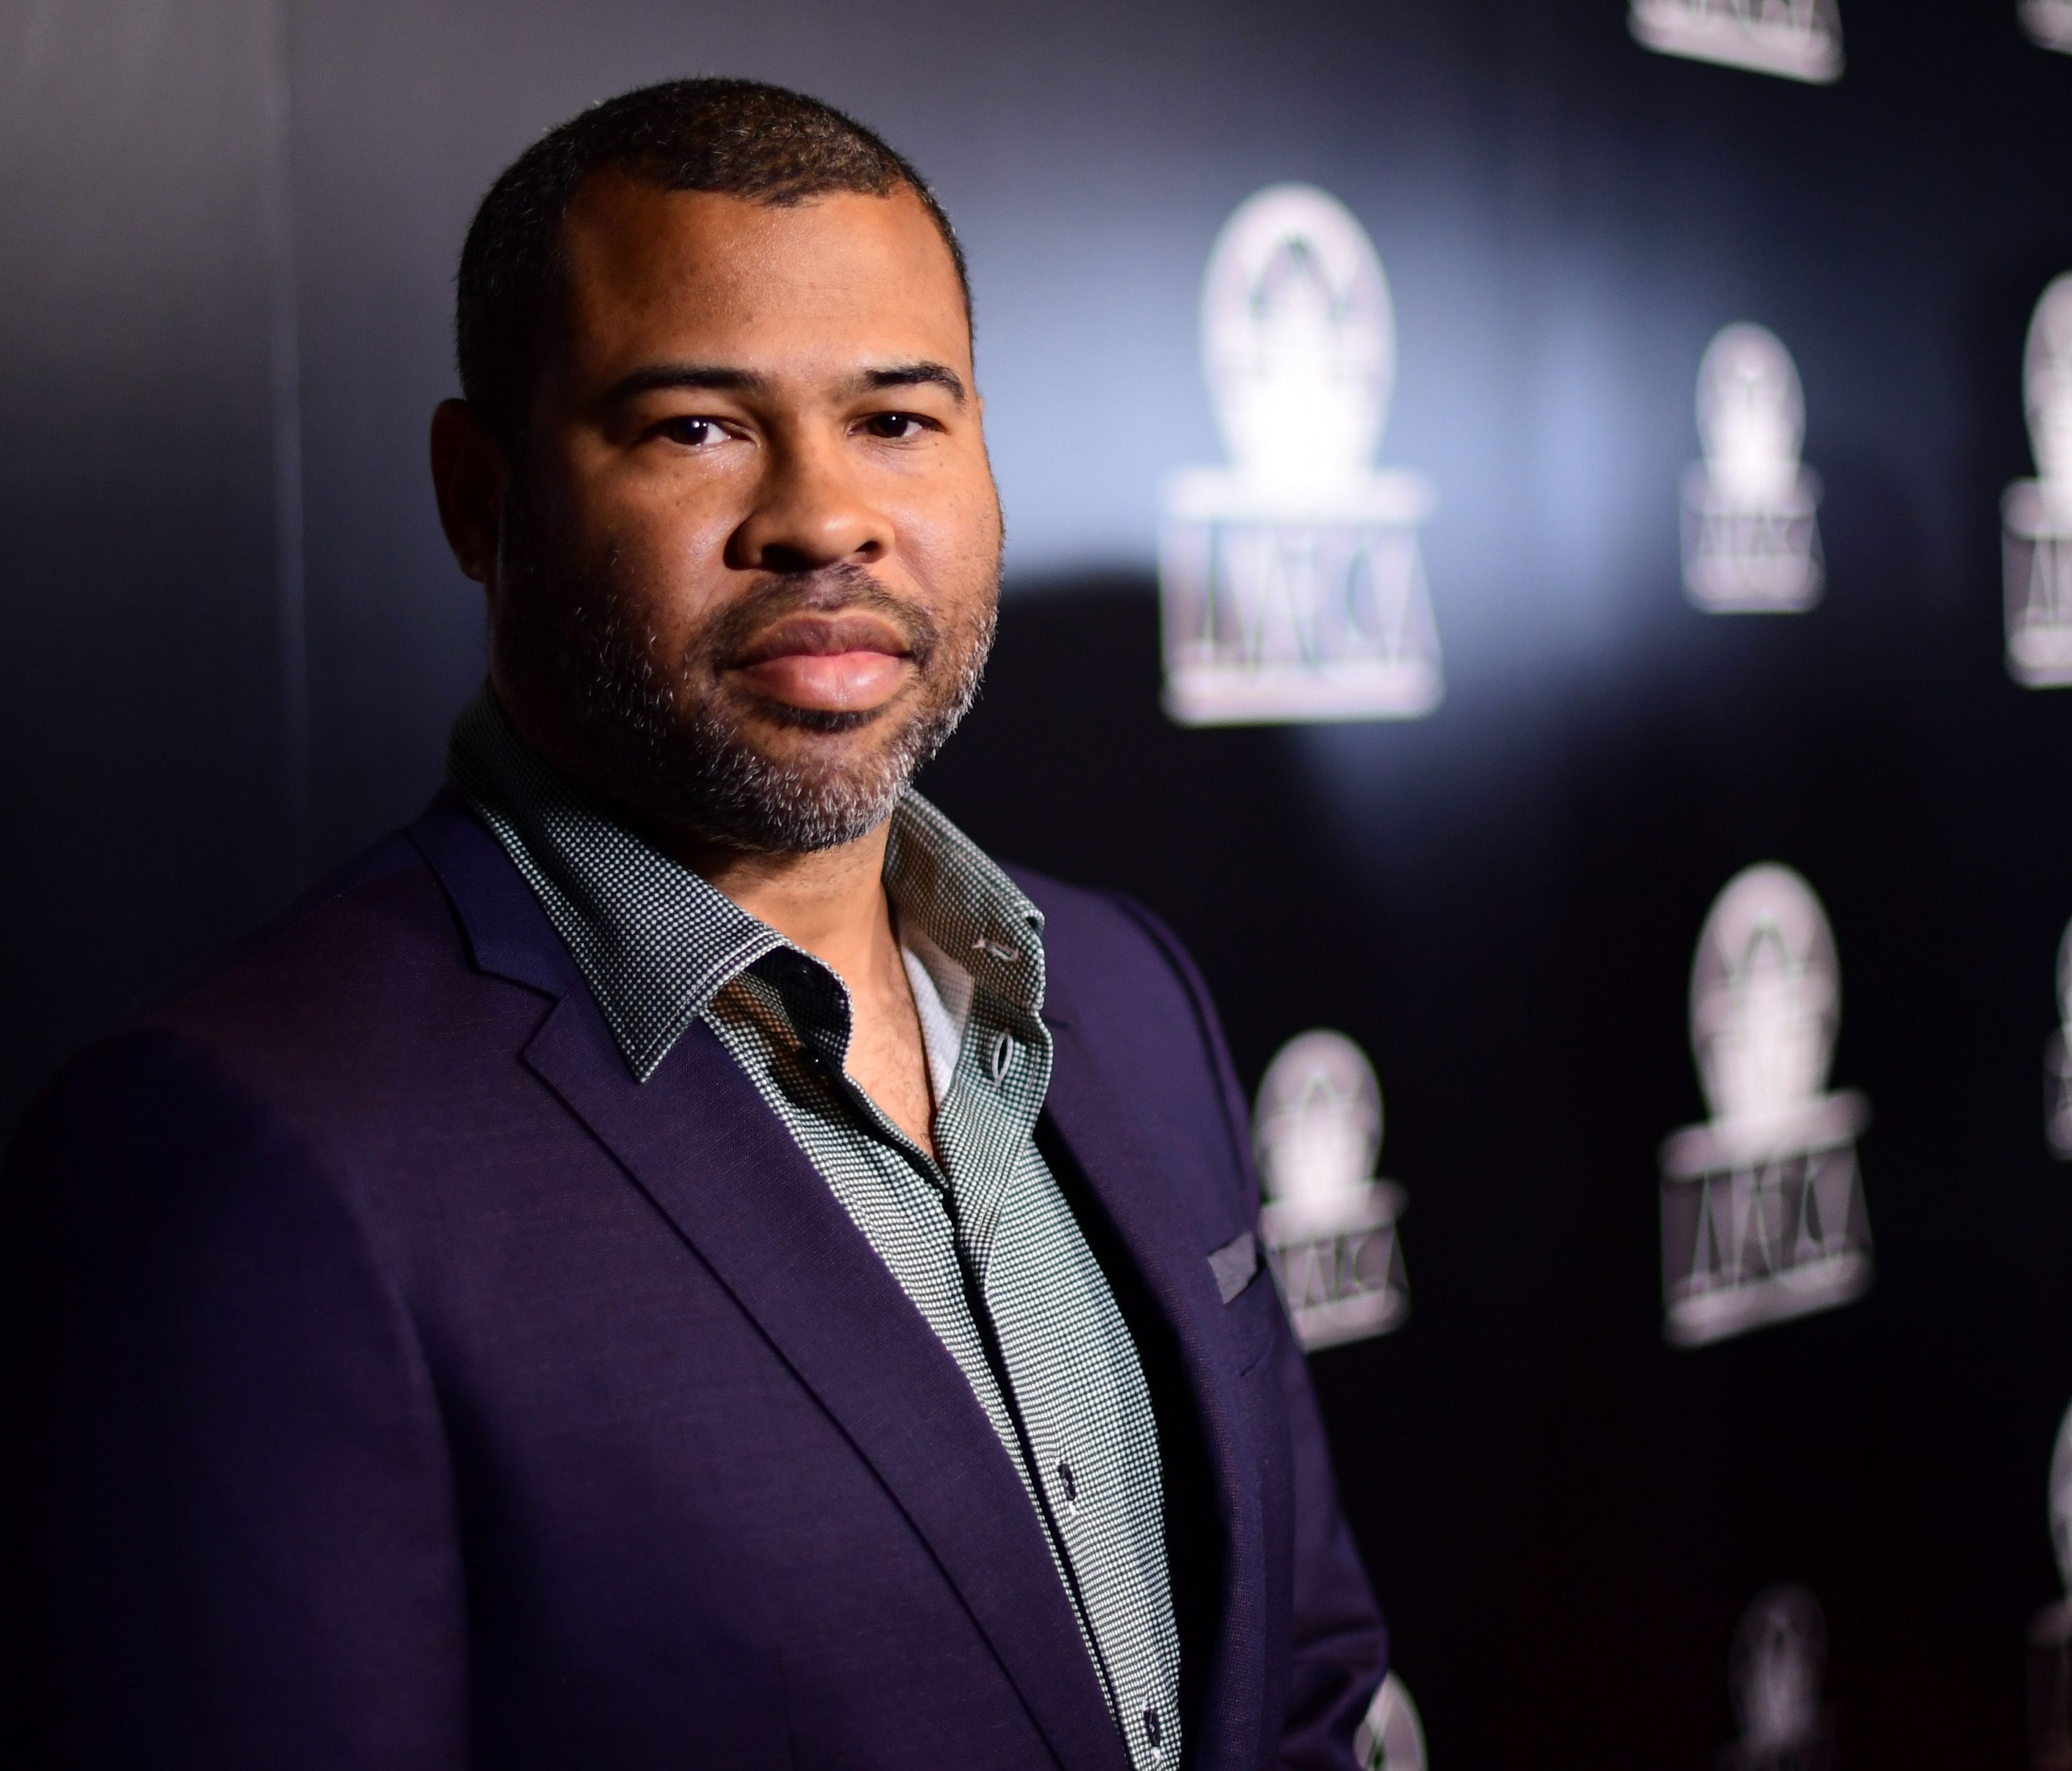 LOS ANGELES, CA - JANUARY 13:  Jordan Peele attends the 43rd Annual Los Angeles Film Critics Association Awards on January 13, 2018 in Los Angeles, California.  (Photo by Matt Winkelmeyer/Getty Images) ORG XMIT: 775090494 ORIG FILE ID: 904644992